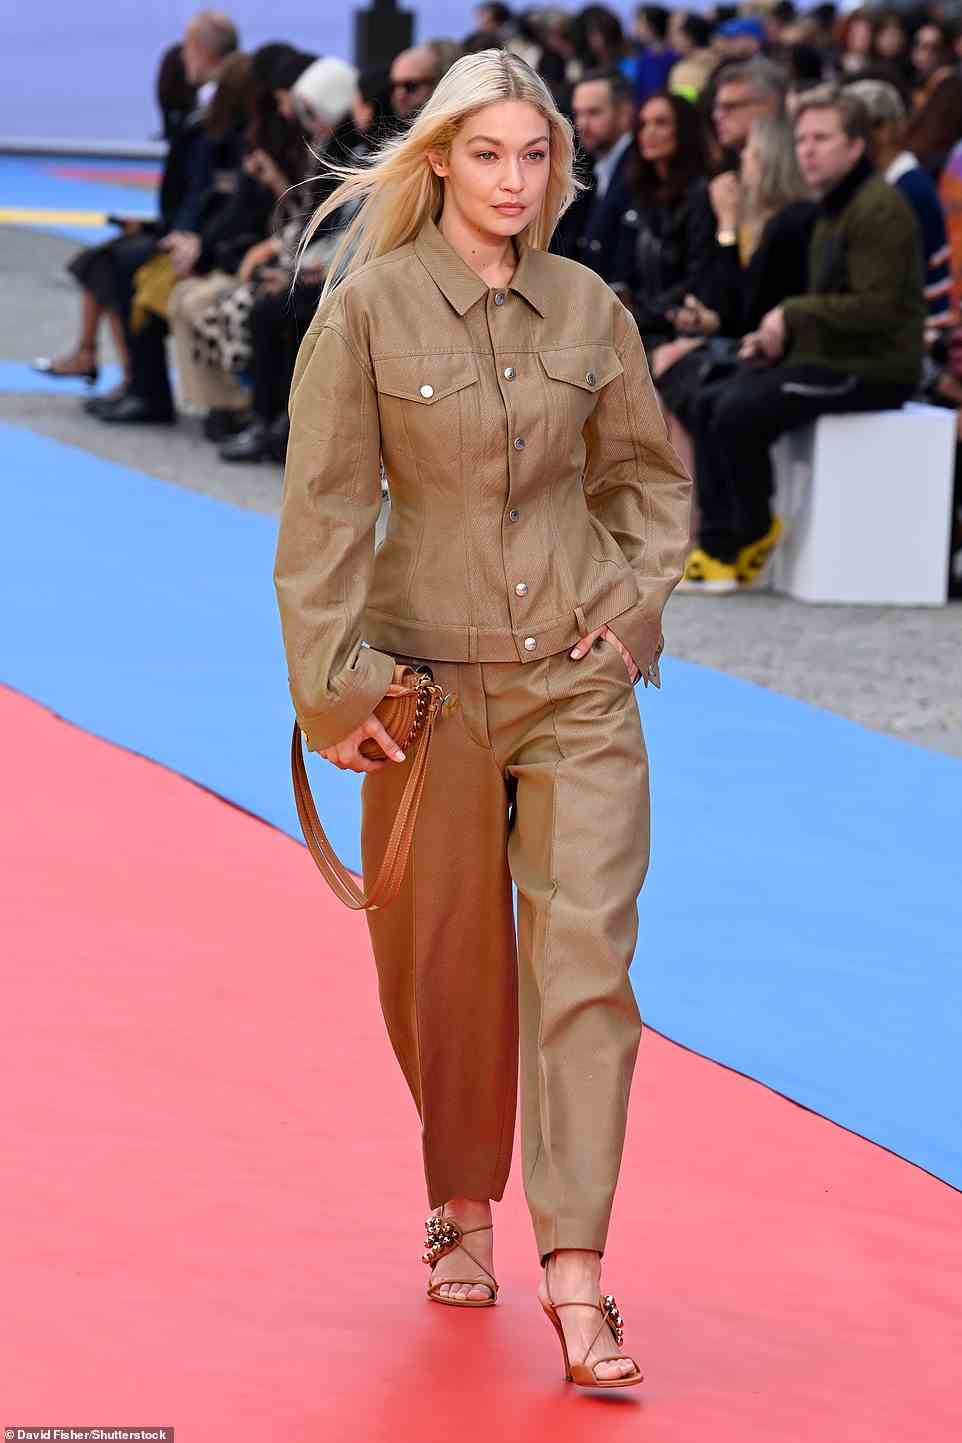 Stylish: Gigi later changed outfits as she strutted down the runway once again, donning vegan leather trousers with a matching khaki jacket